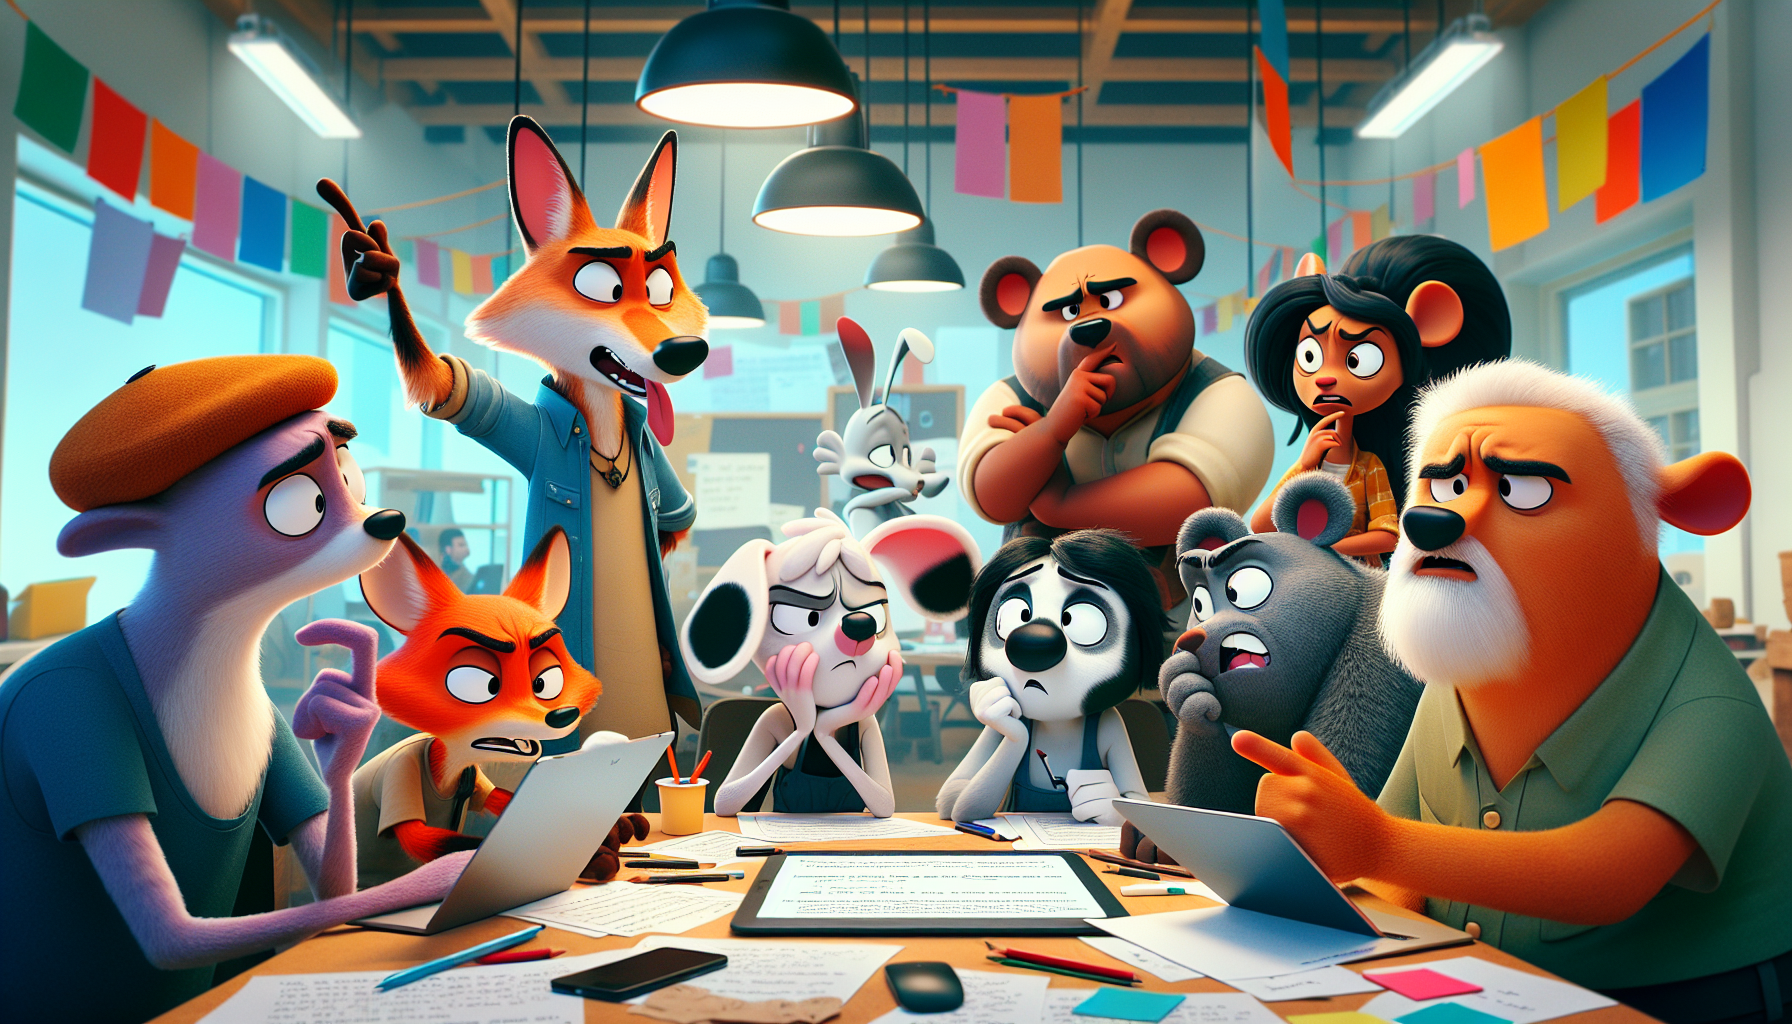 An animated workshop scene where a diverse group of cartoon characters, including a witty fox and a teary-eyed giant, are enthusiastically discussing a script around a cluttered table filled with pape